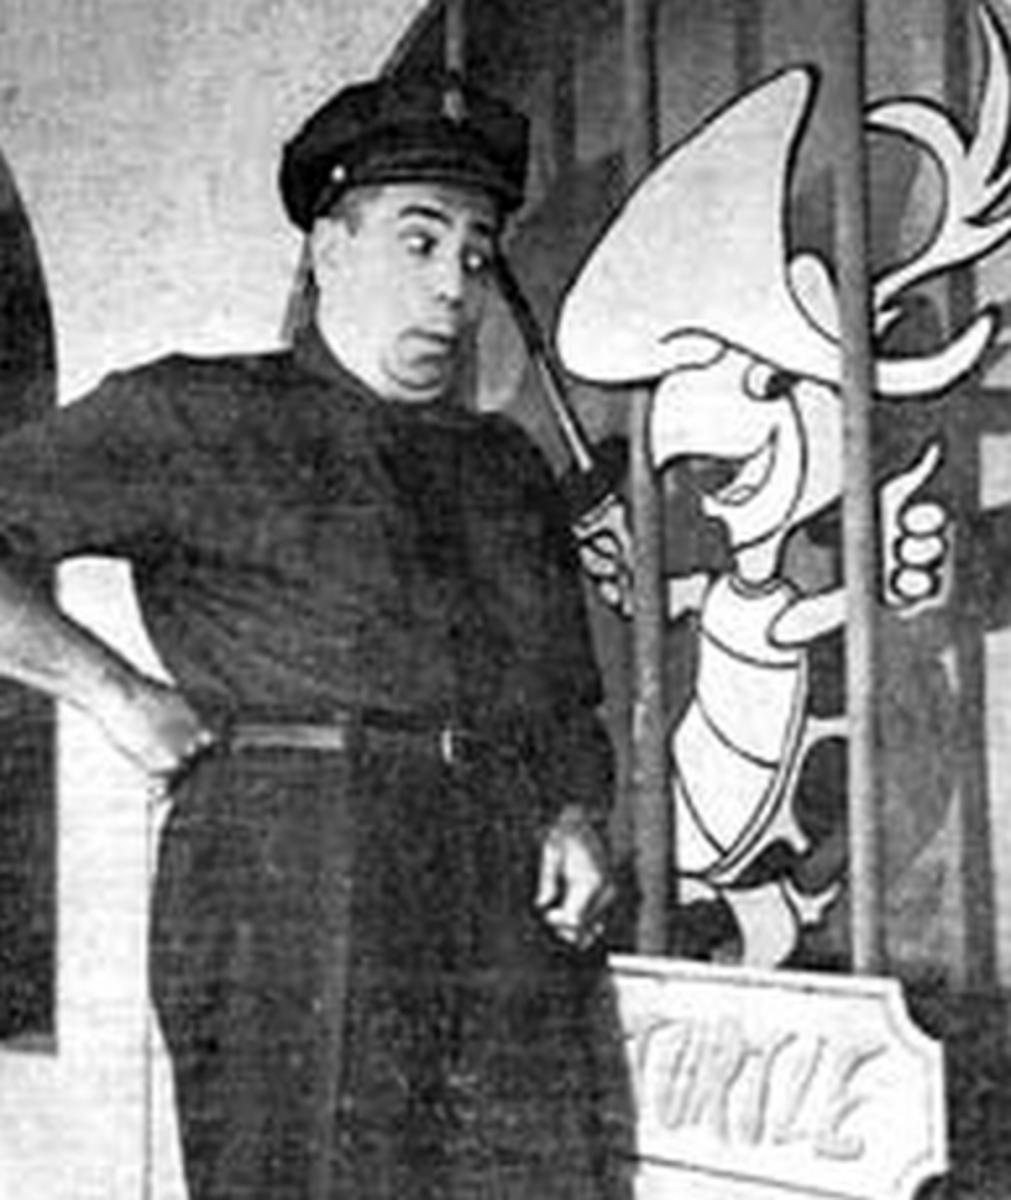 Milt Moss hosted a local New York program titled "Cartoon Zoo", which presented the three cartoons under the context of a zookeeper conversing with the characters